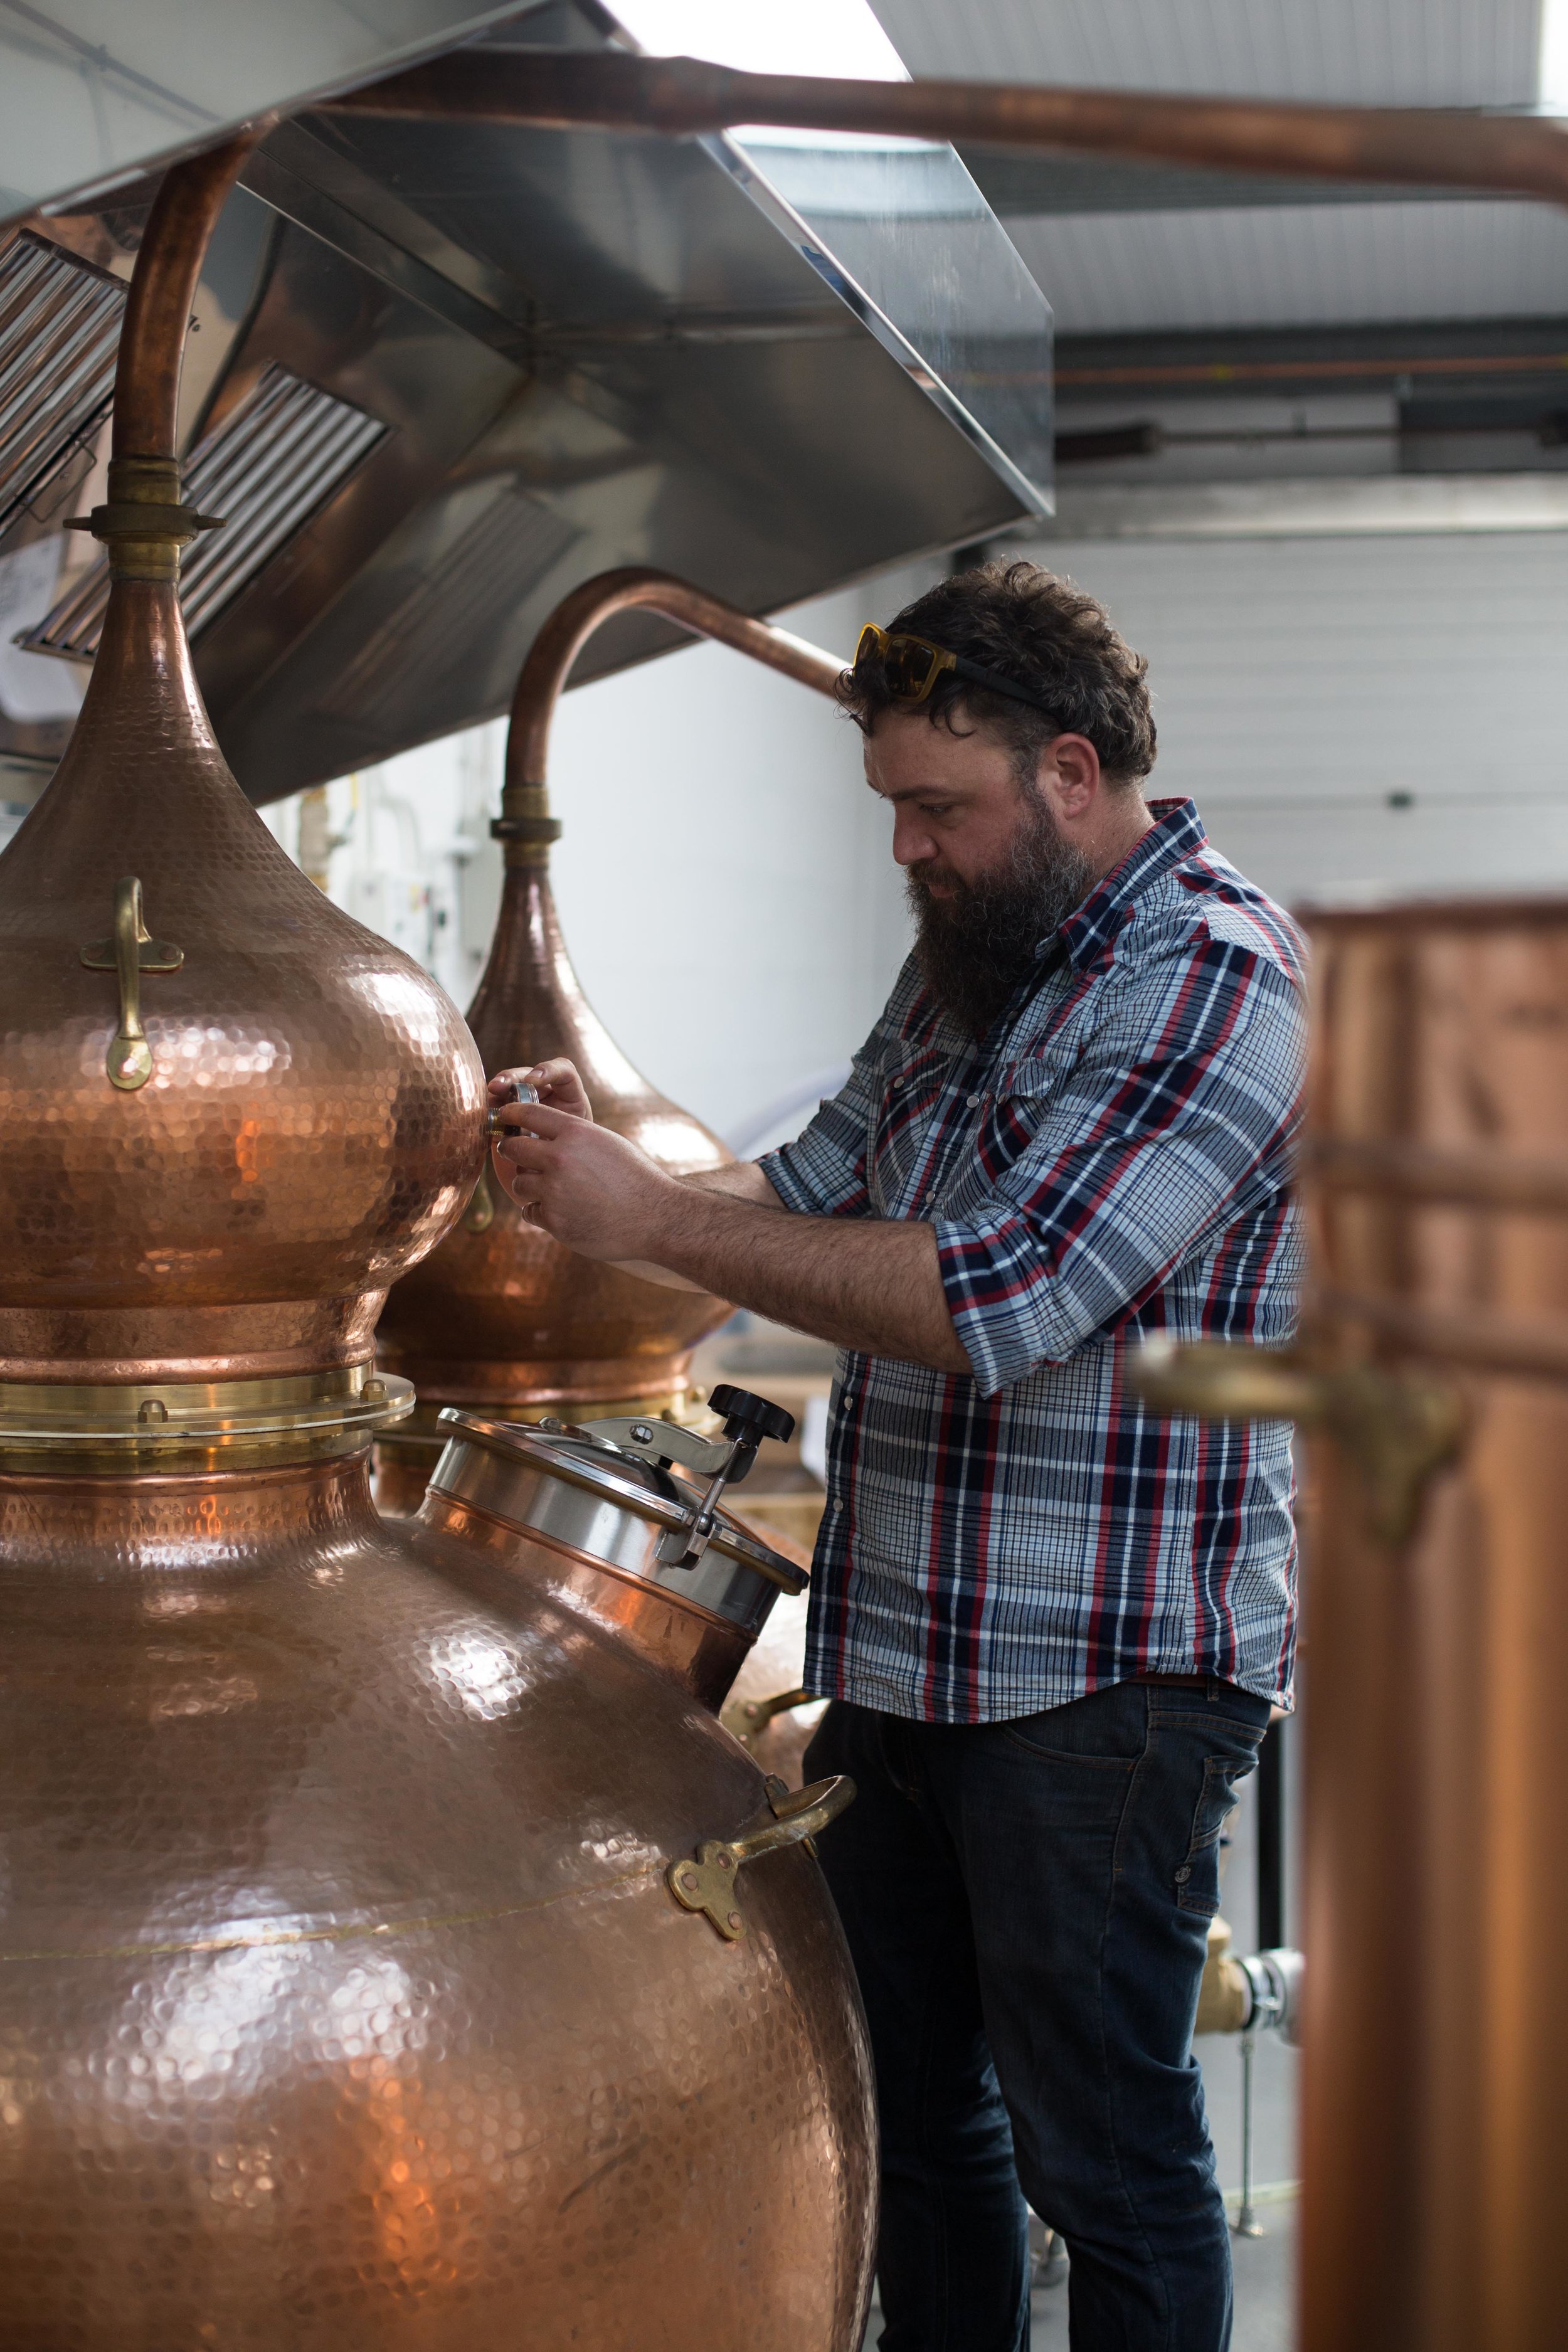  Shaun checks the temperature gauge on one of the copper stills in which the gin is distilled. 